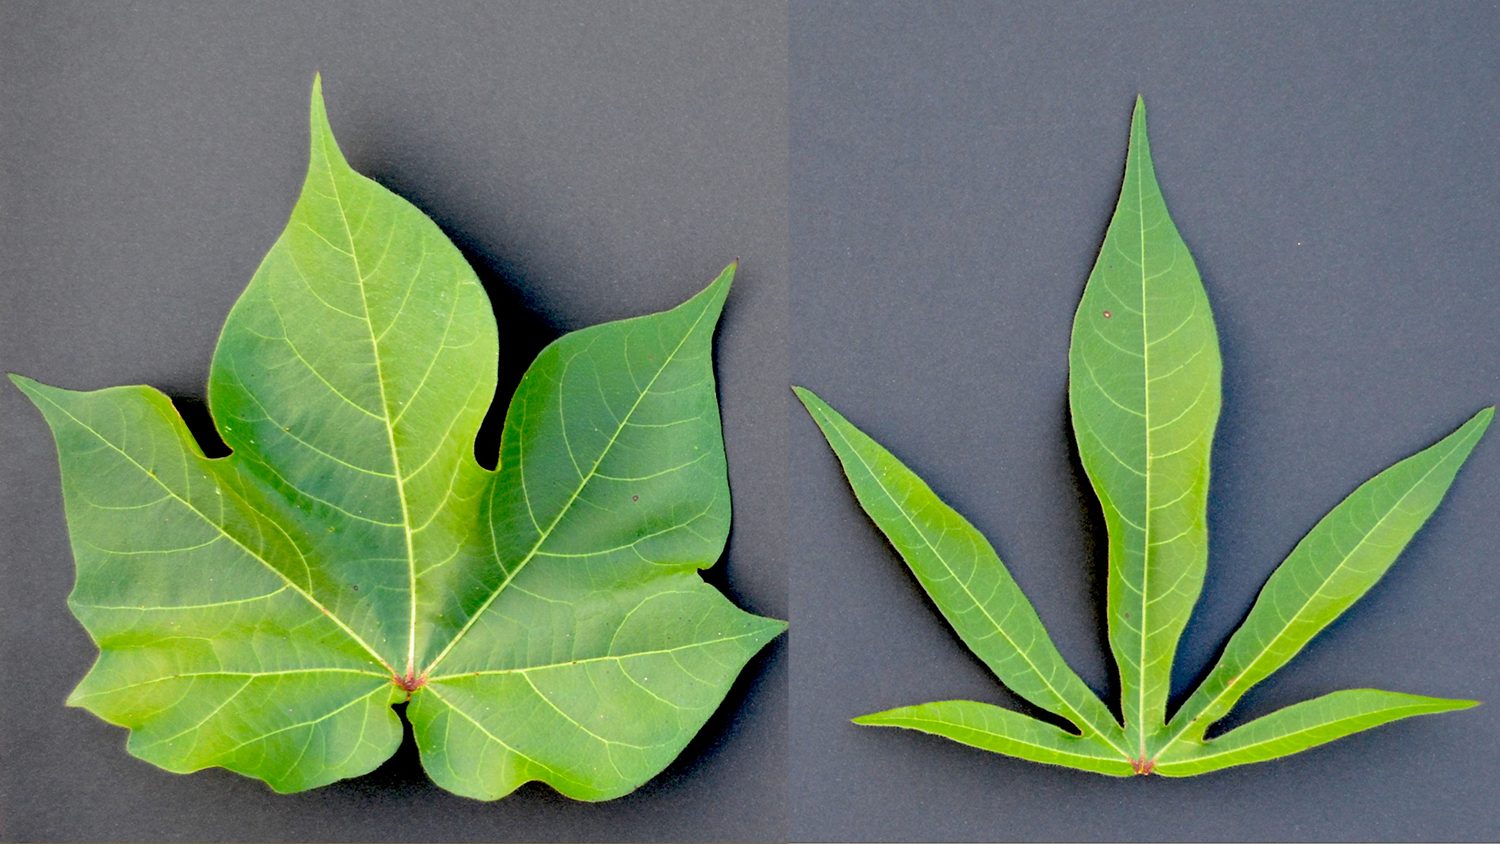 A broad 'normal' cotton leaf compared to an 'okra'-shaped cotton leaf.